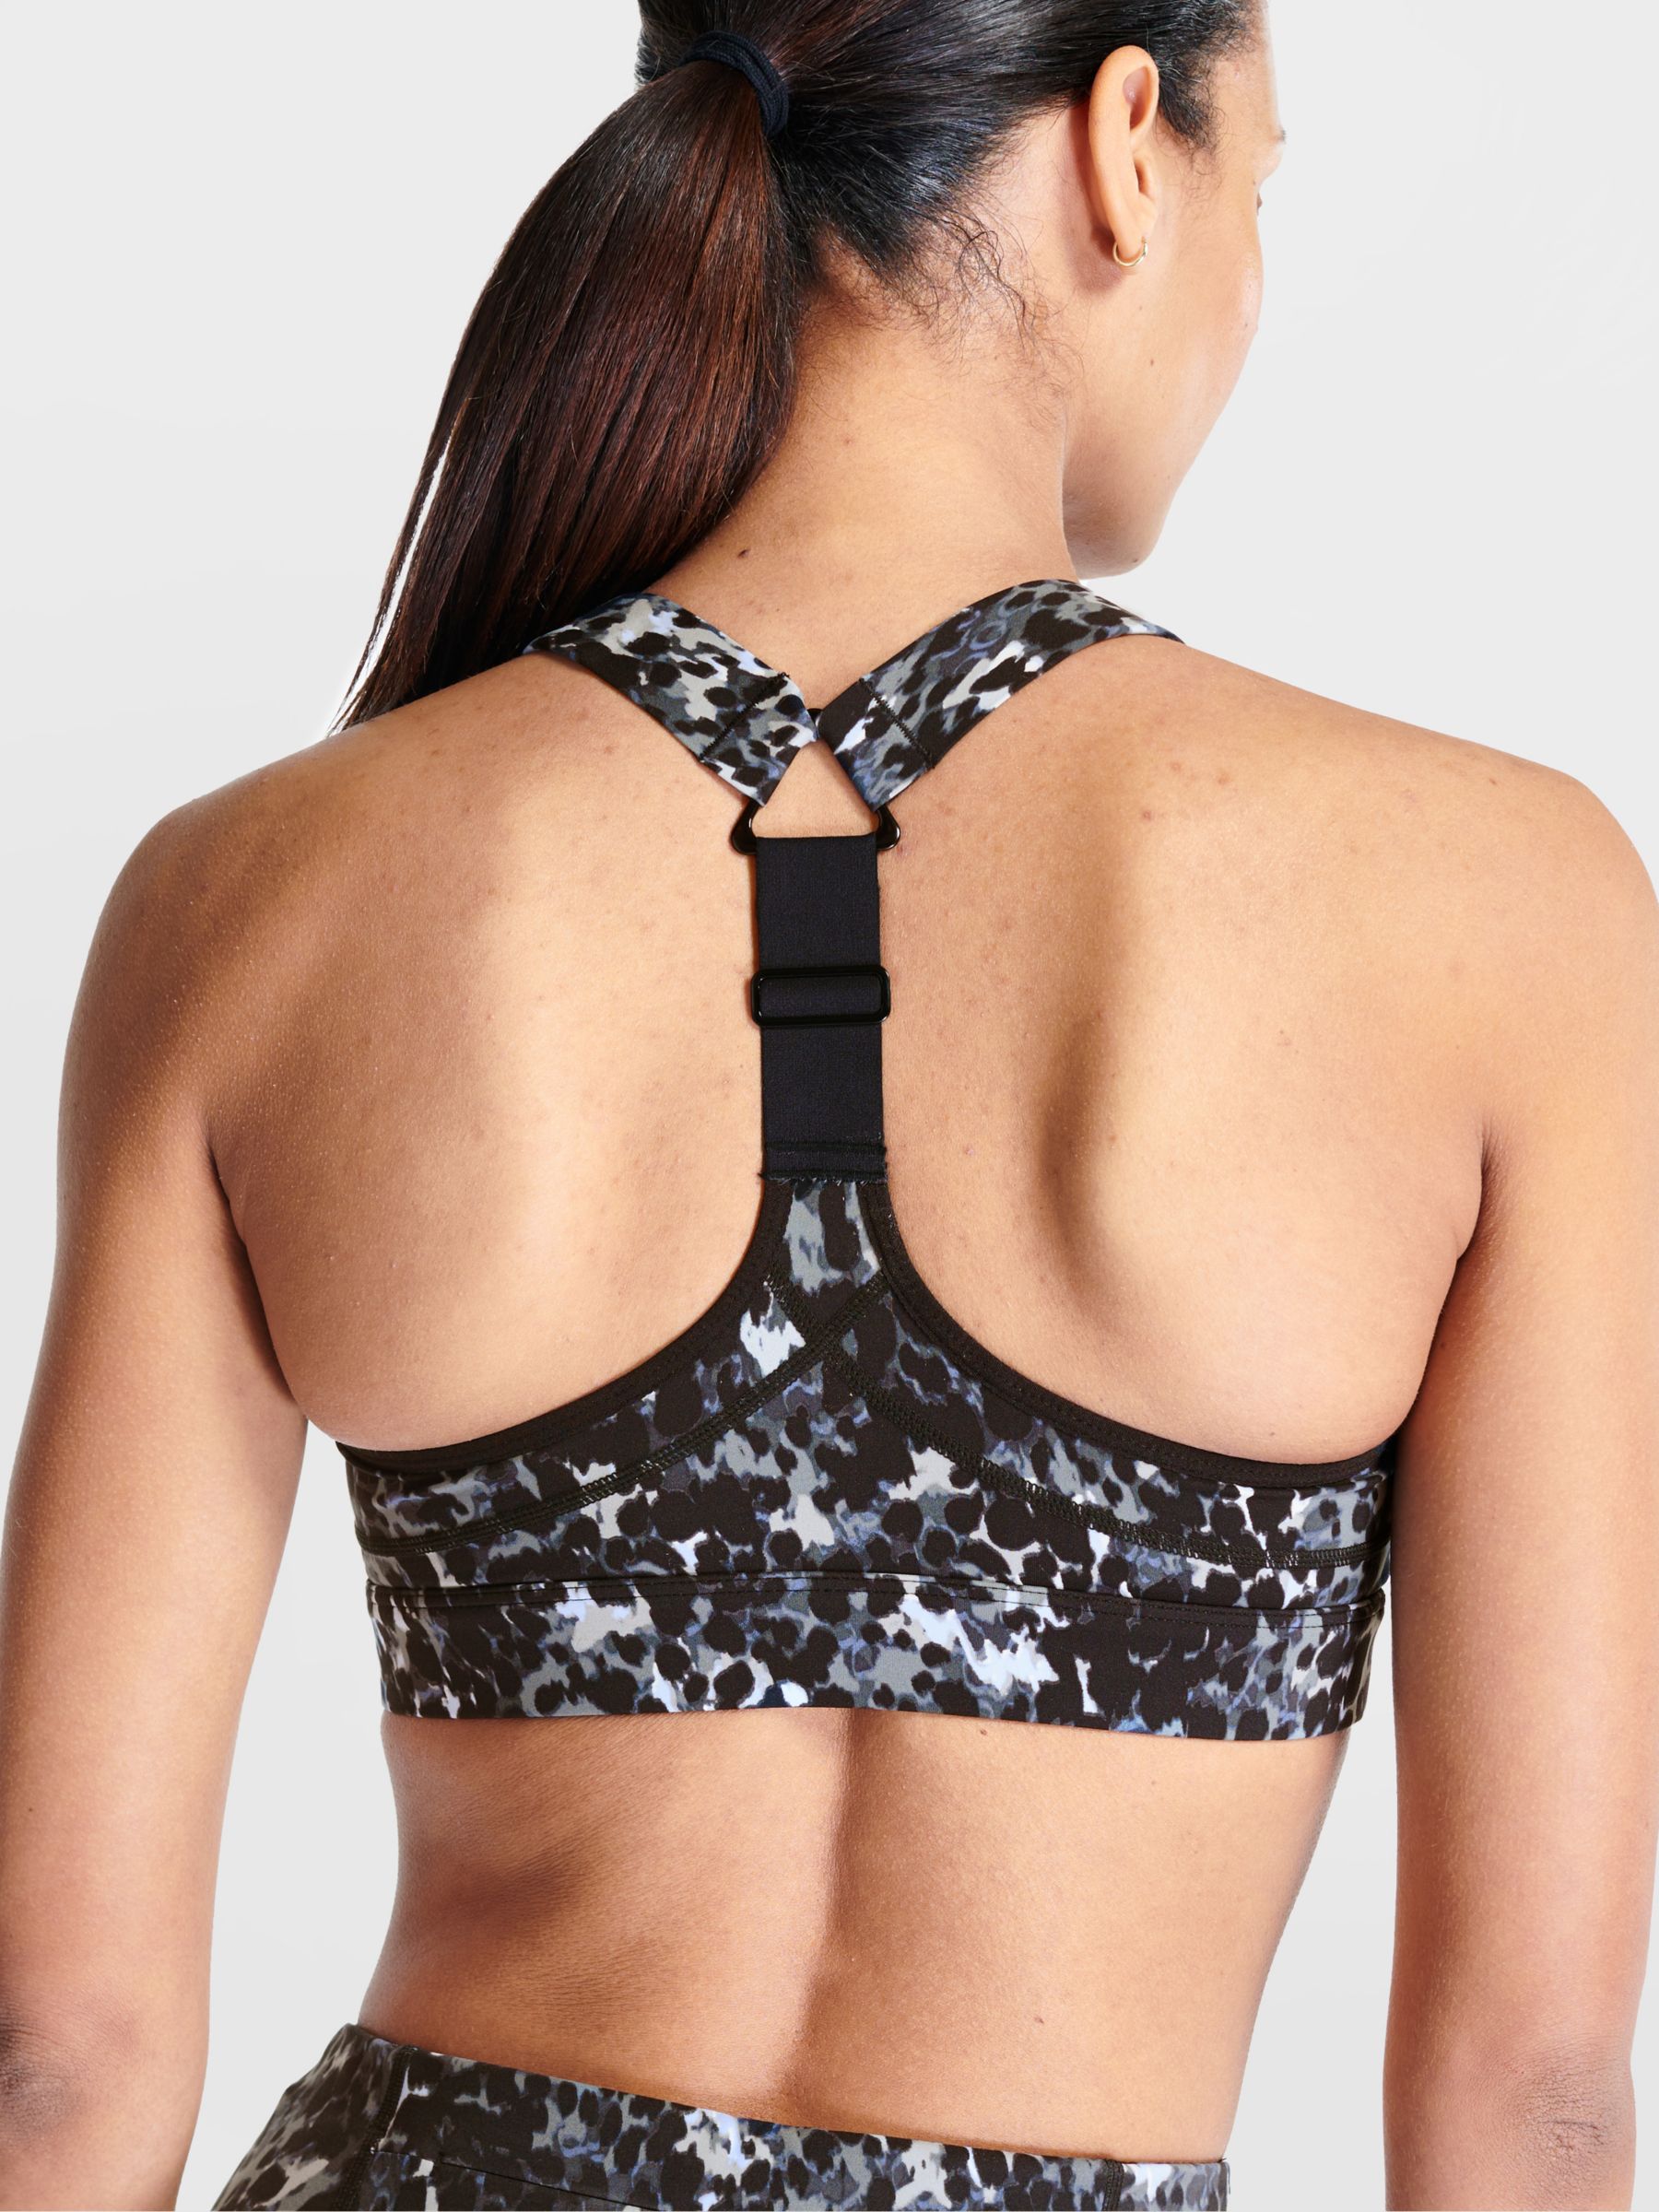 LLG ART FLOWERS: (7 Choices) Ladies Sports Bra. All-Over Print